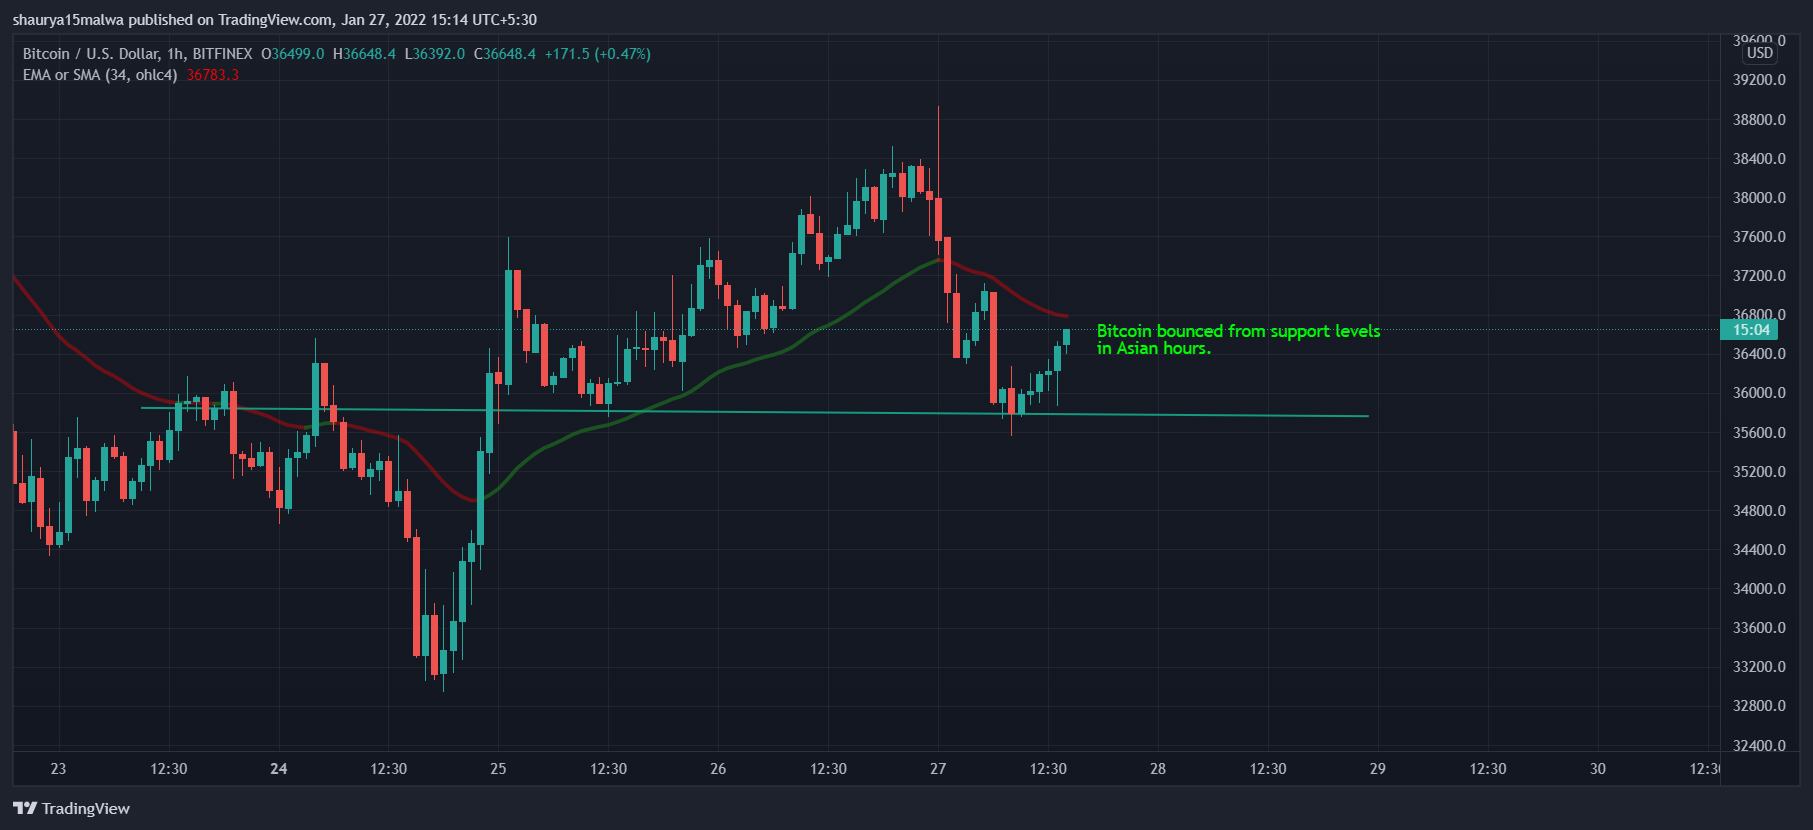 Bitcoin slightly recovered after falling to support levels after Wednesday's Fed meeting. (TradingView)